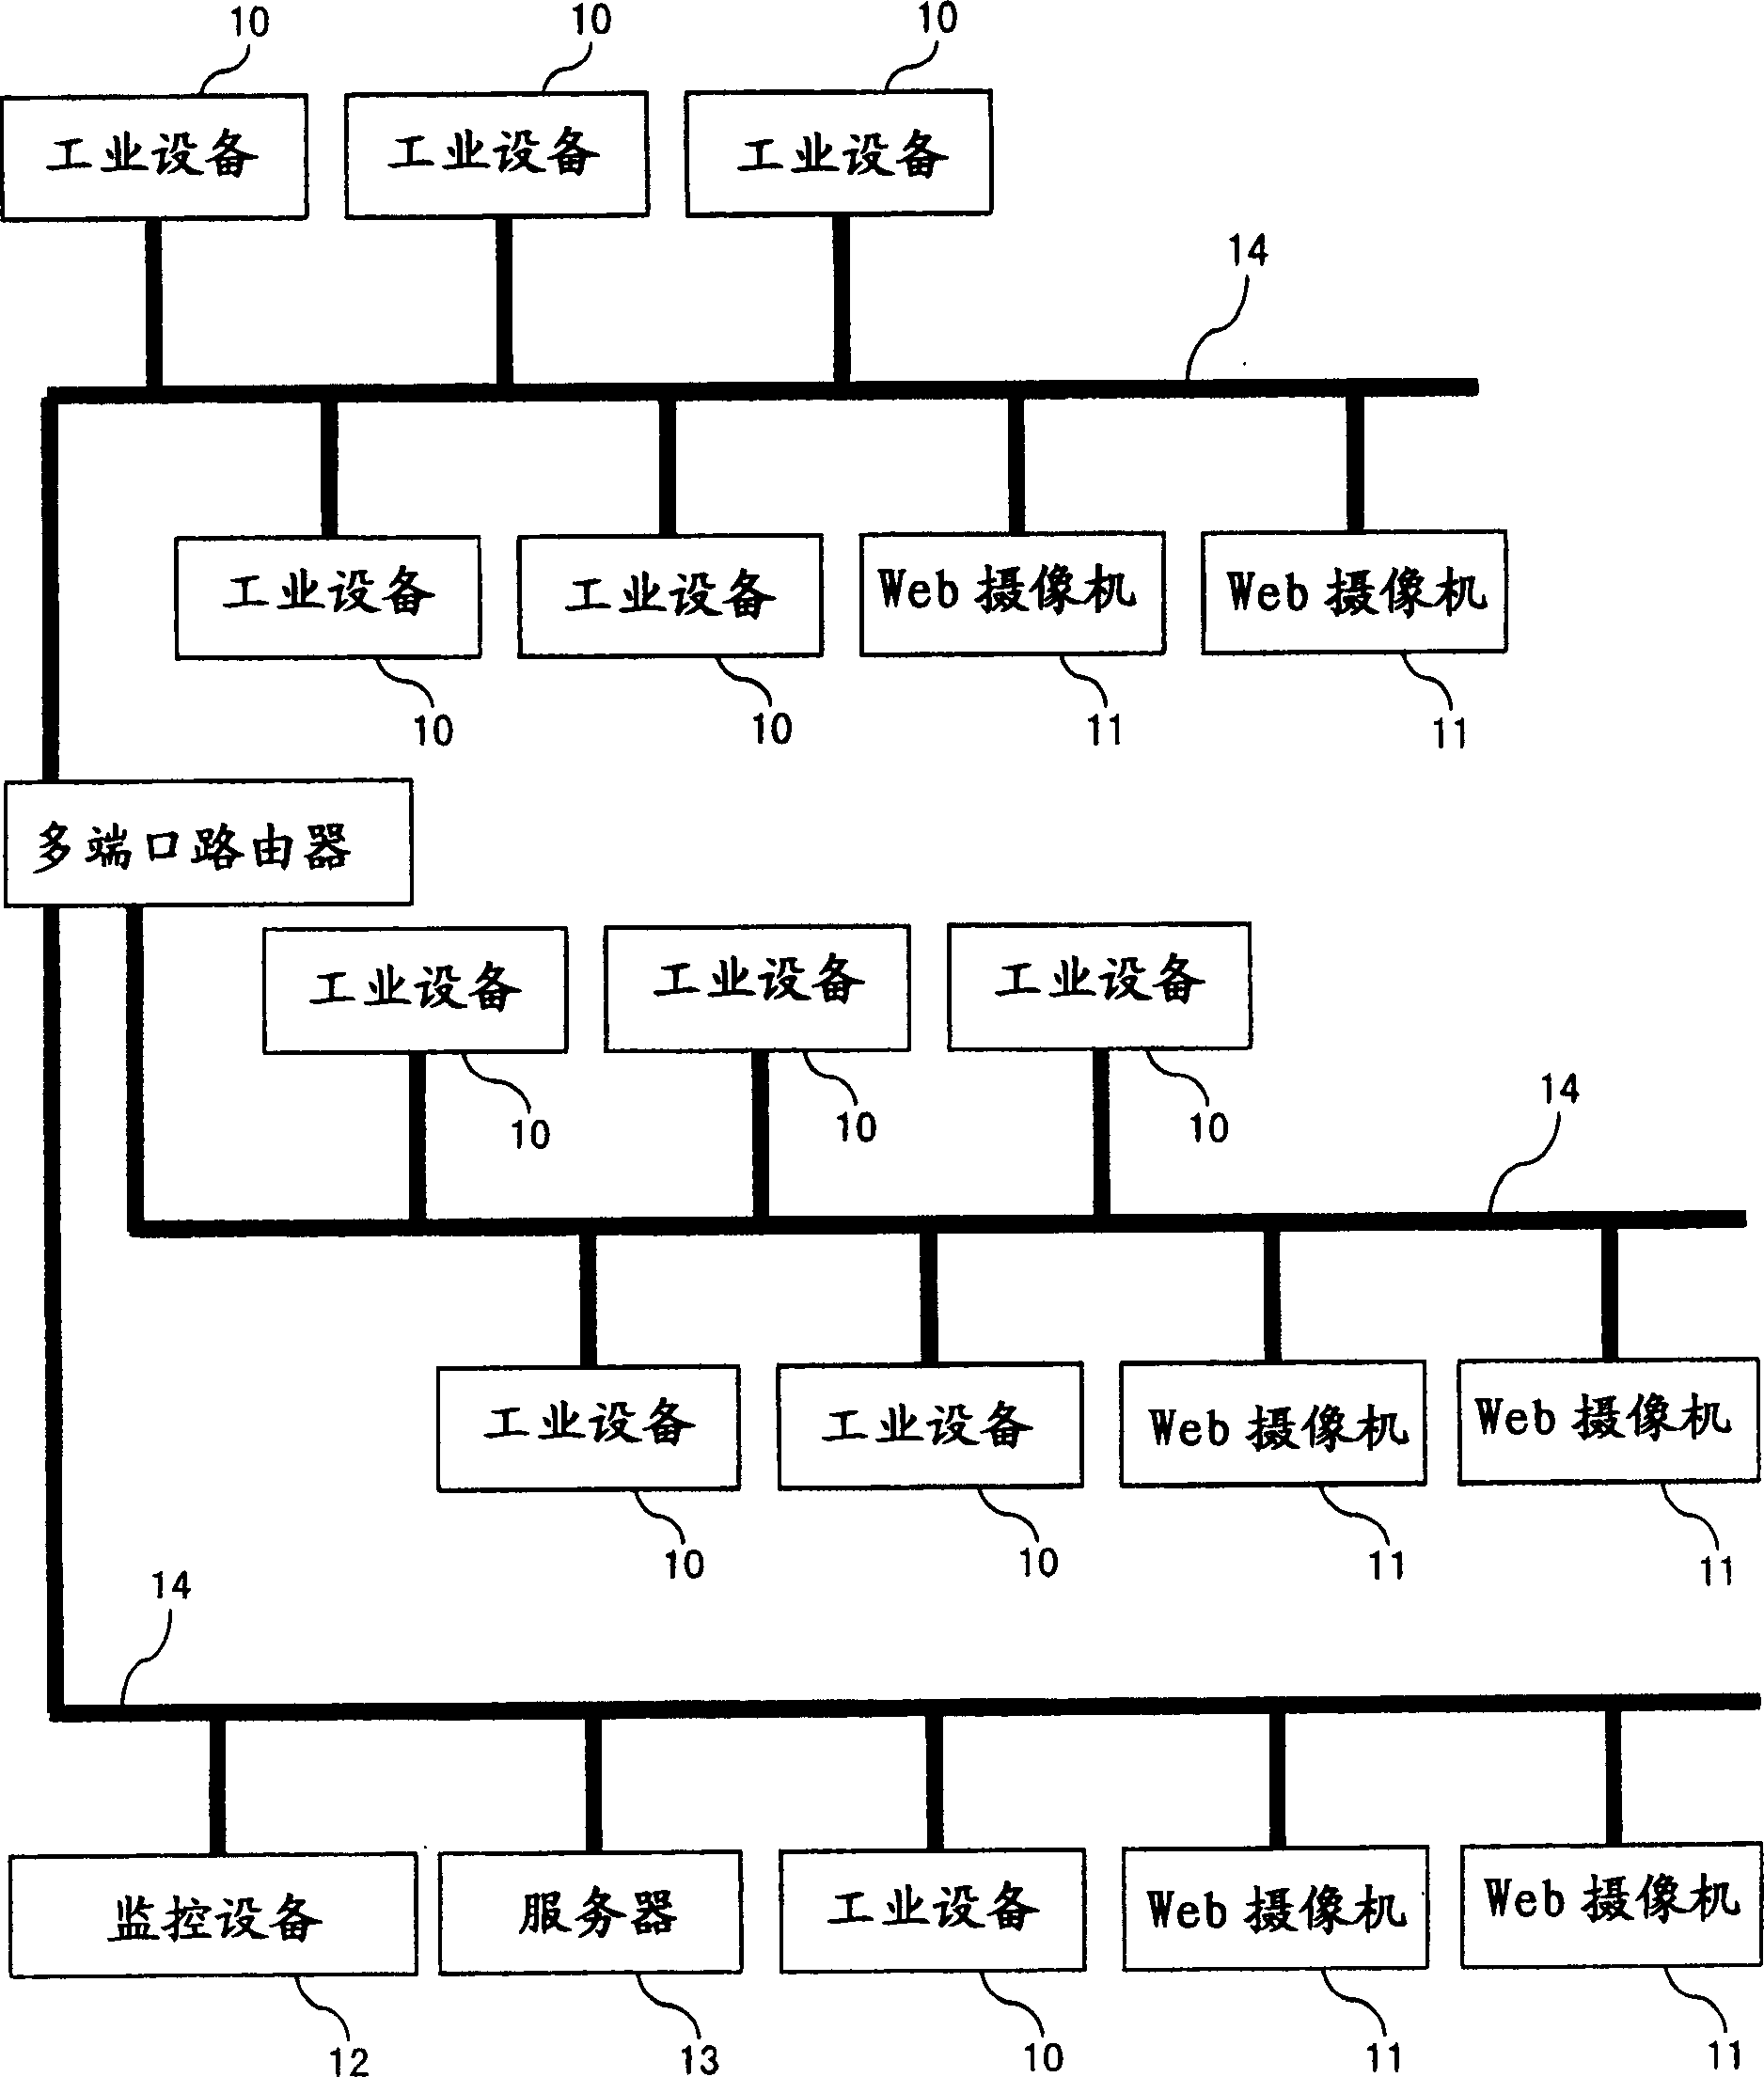 Method and apparatus for displaying only a certain set of devices on the screen of a management device